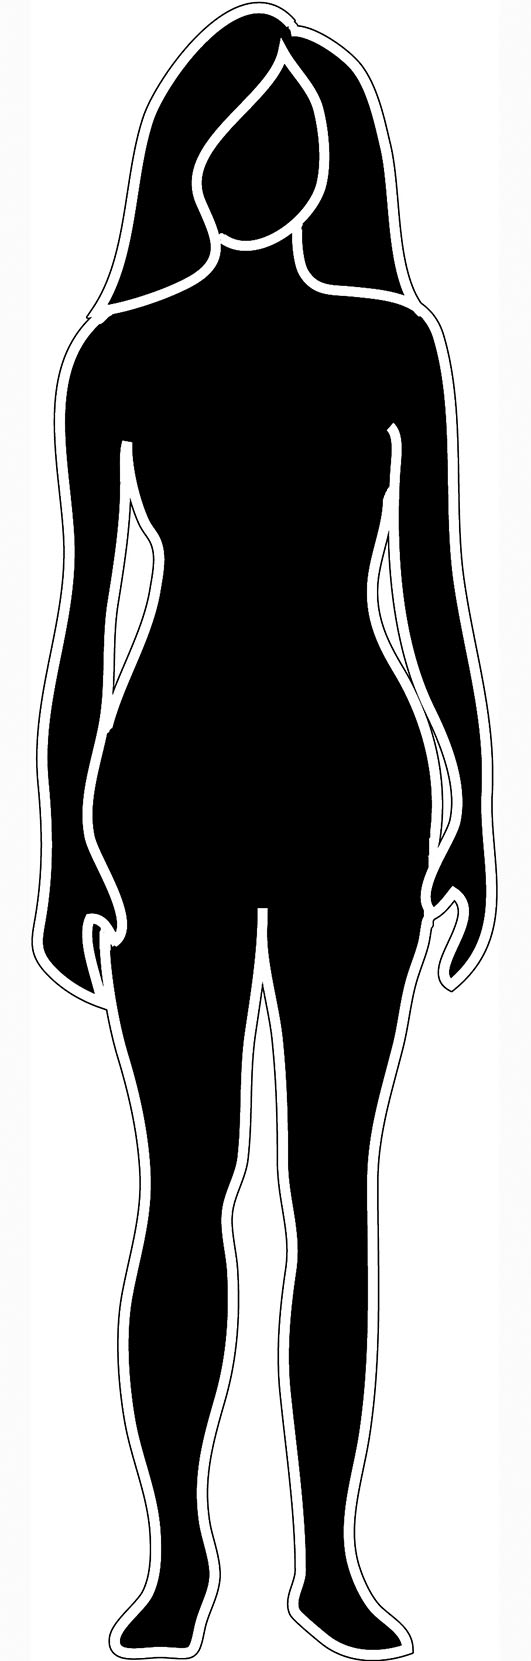 Woman Body Silhouette - Silhouette of woman body stock photo. Image of